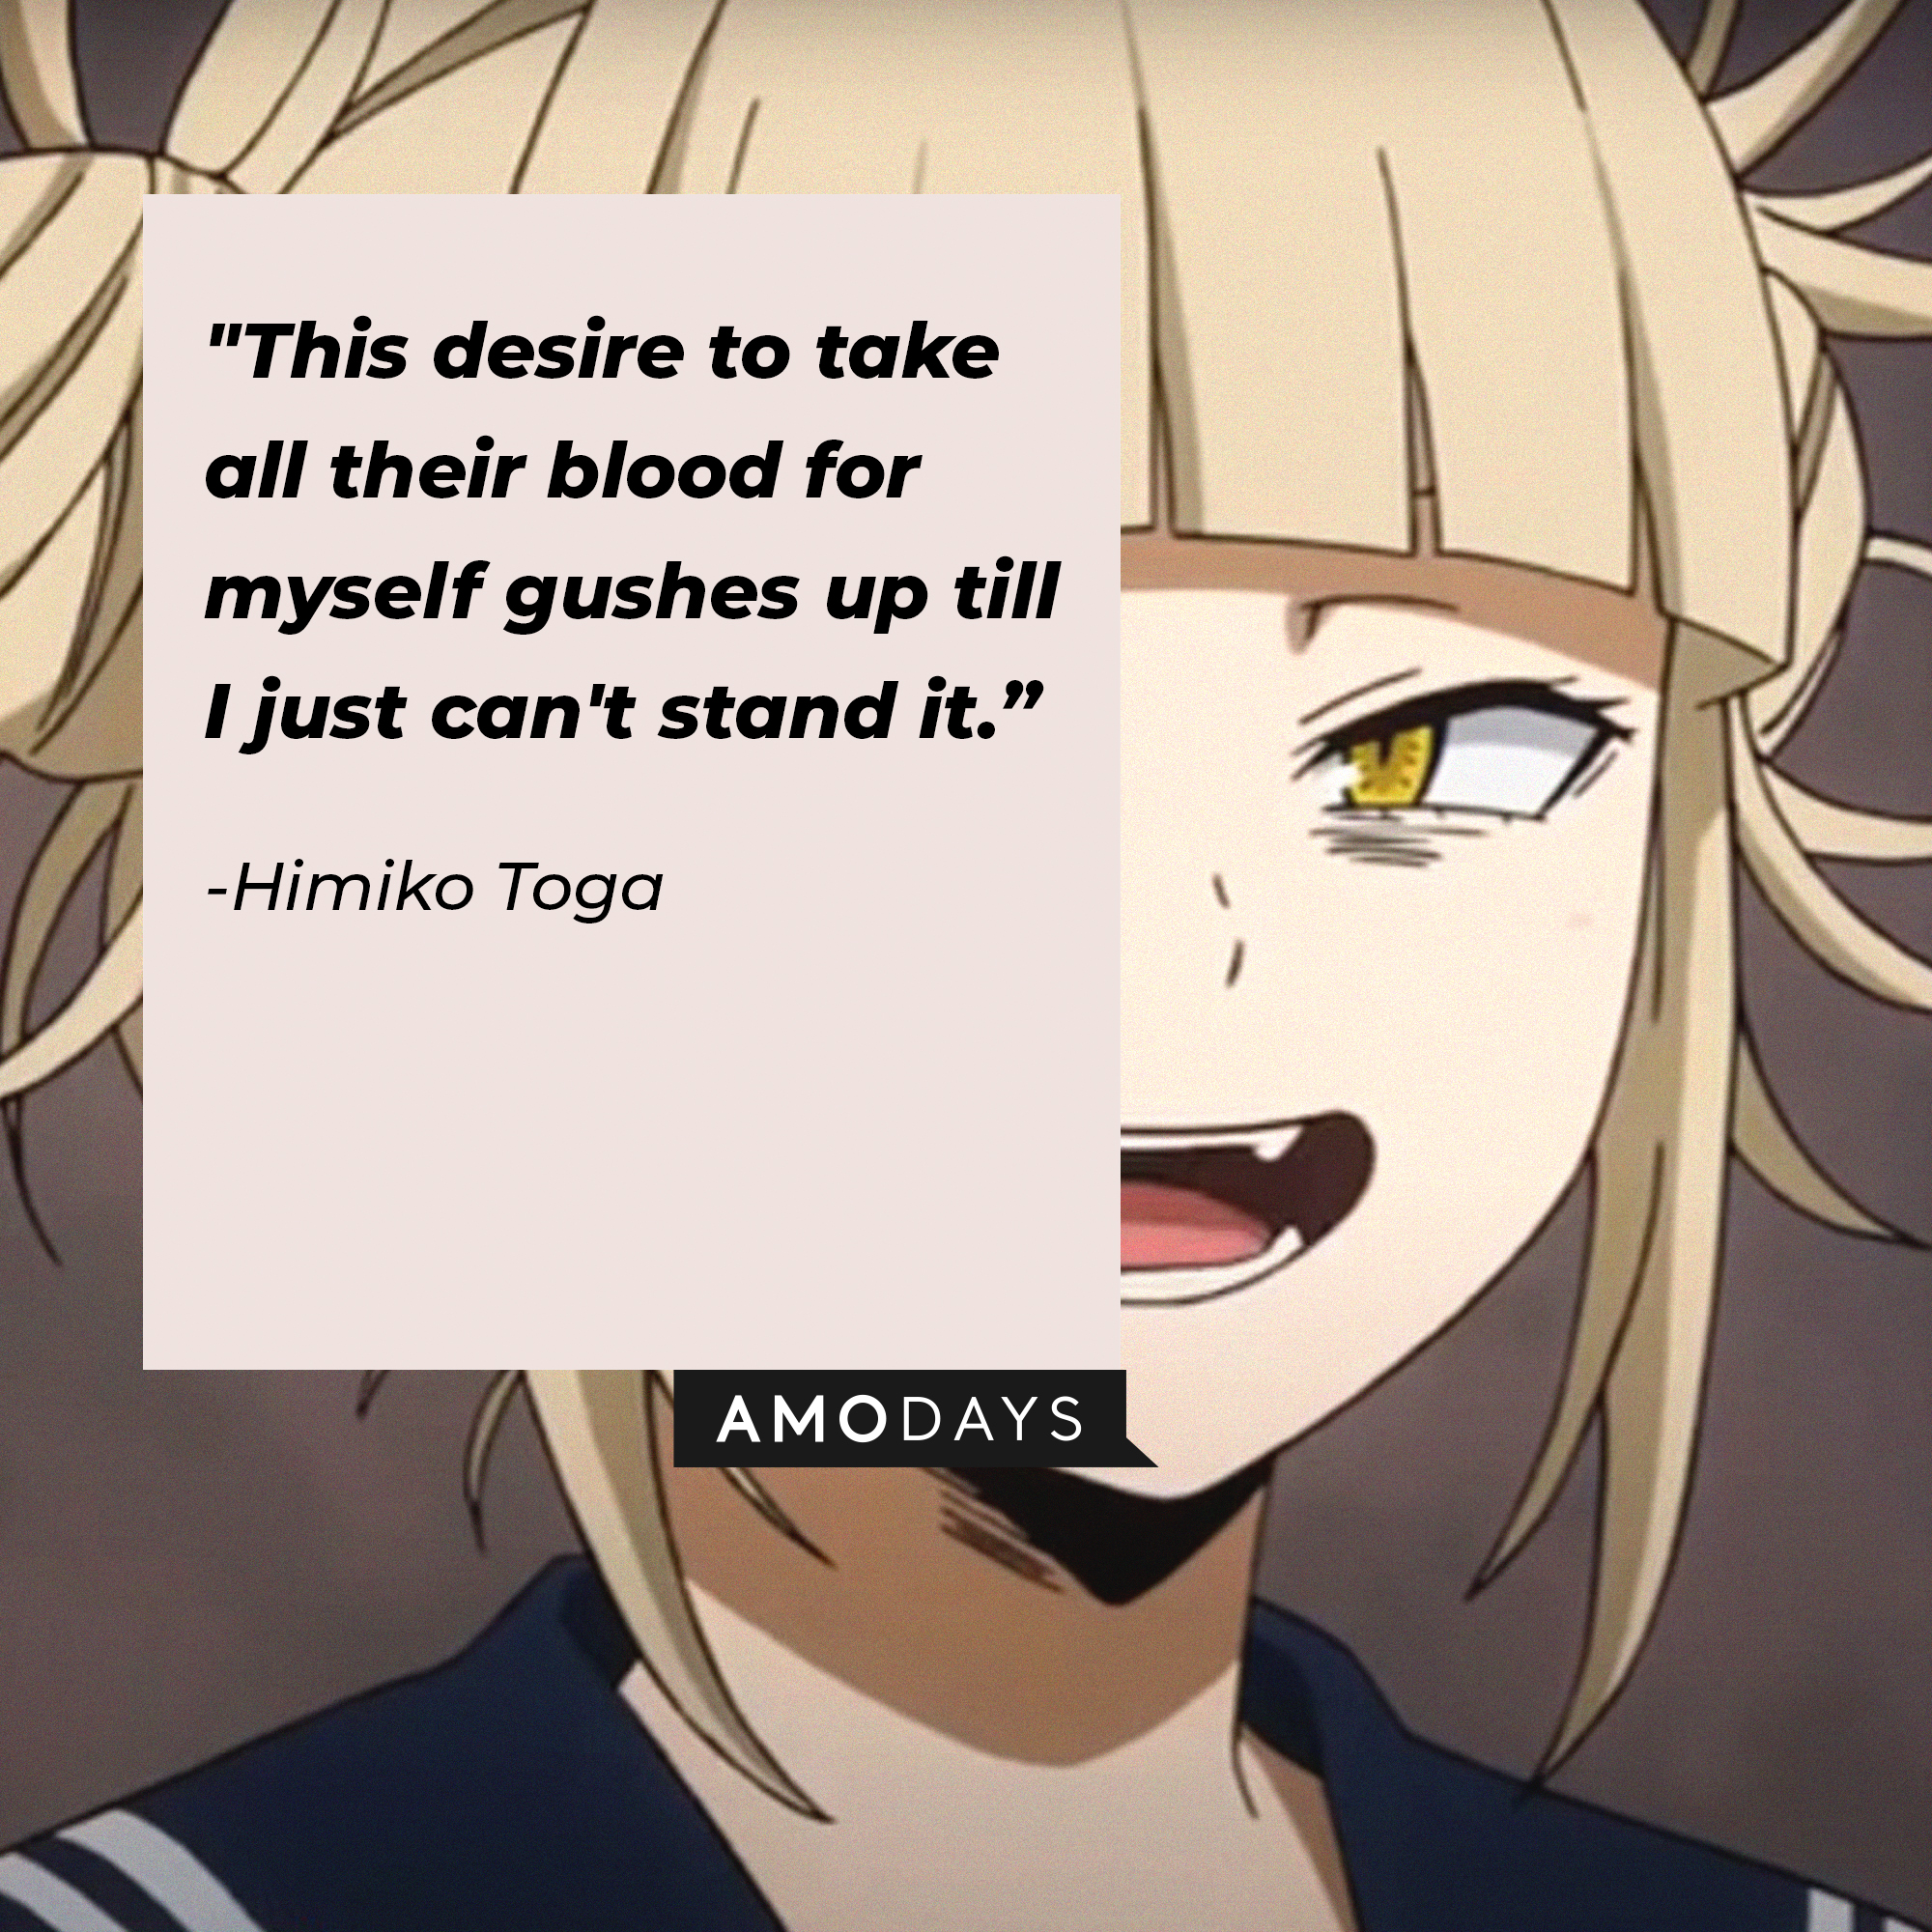 Himiko Toga’s quote: "This desire to take all their blood for myself gushes up till I just can't stand it." | Image: AmoDays